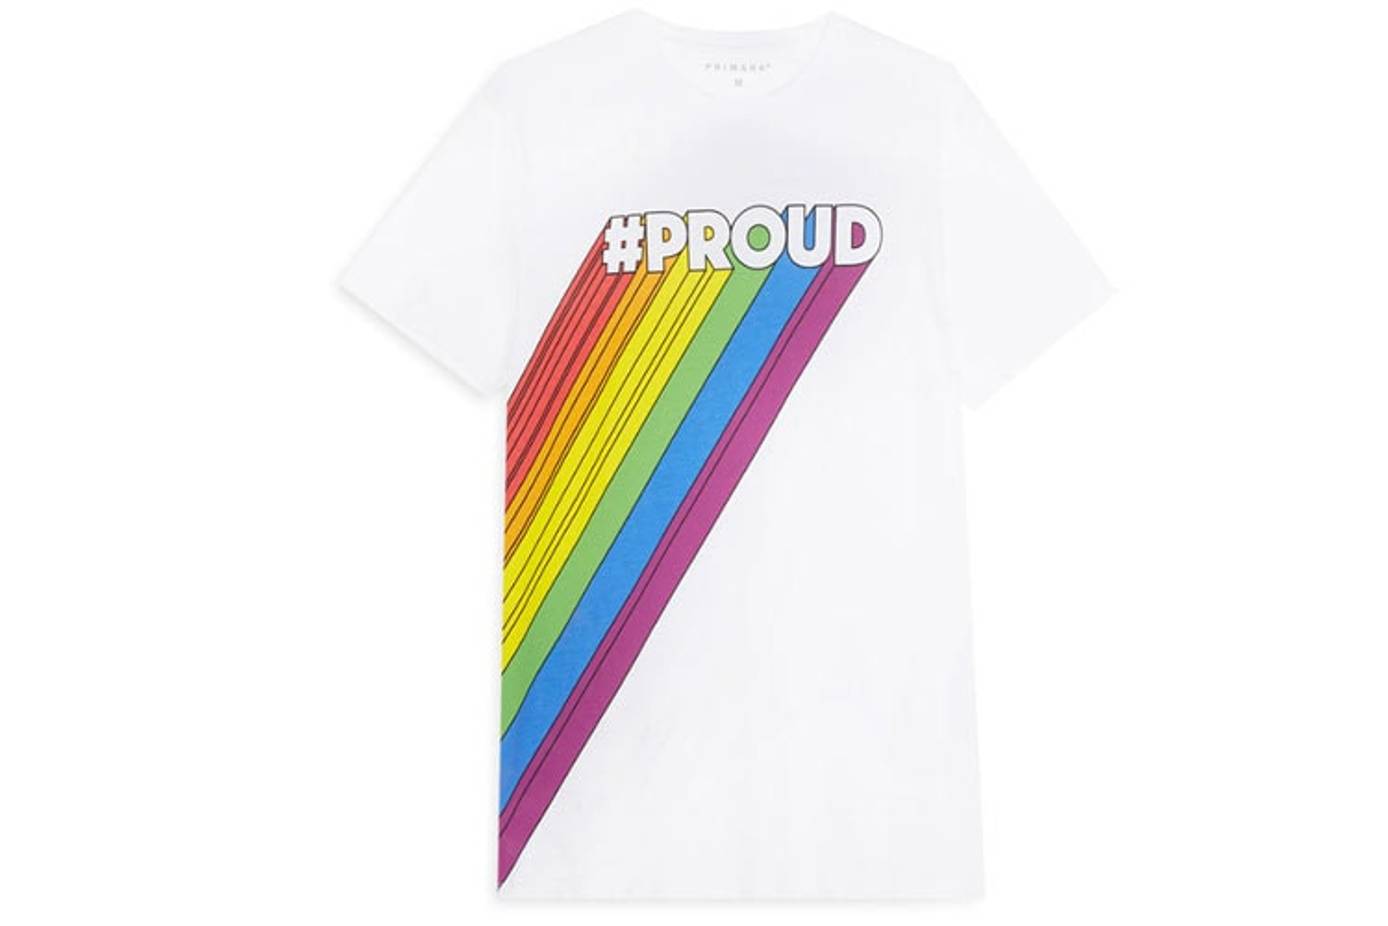 puls heroin median Primark accused of “pinkwashing” in its 2018 Pride Collection